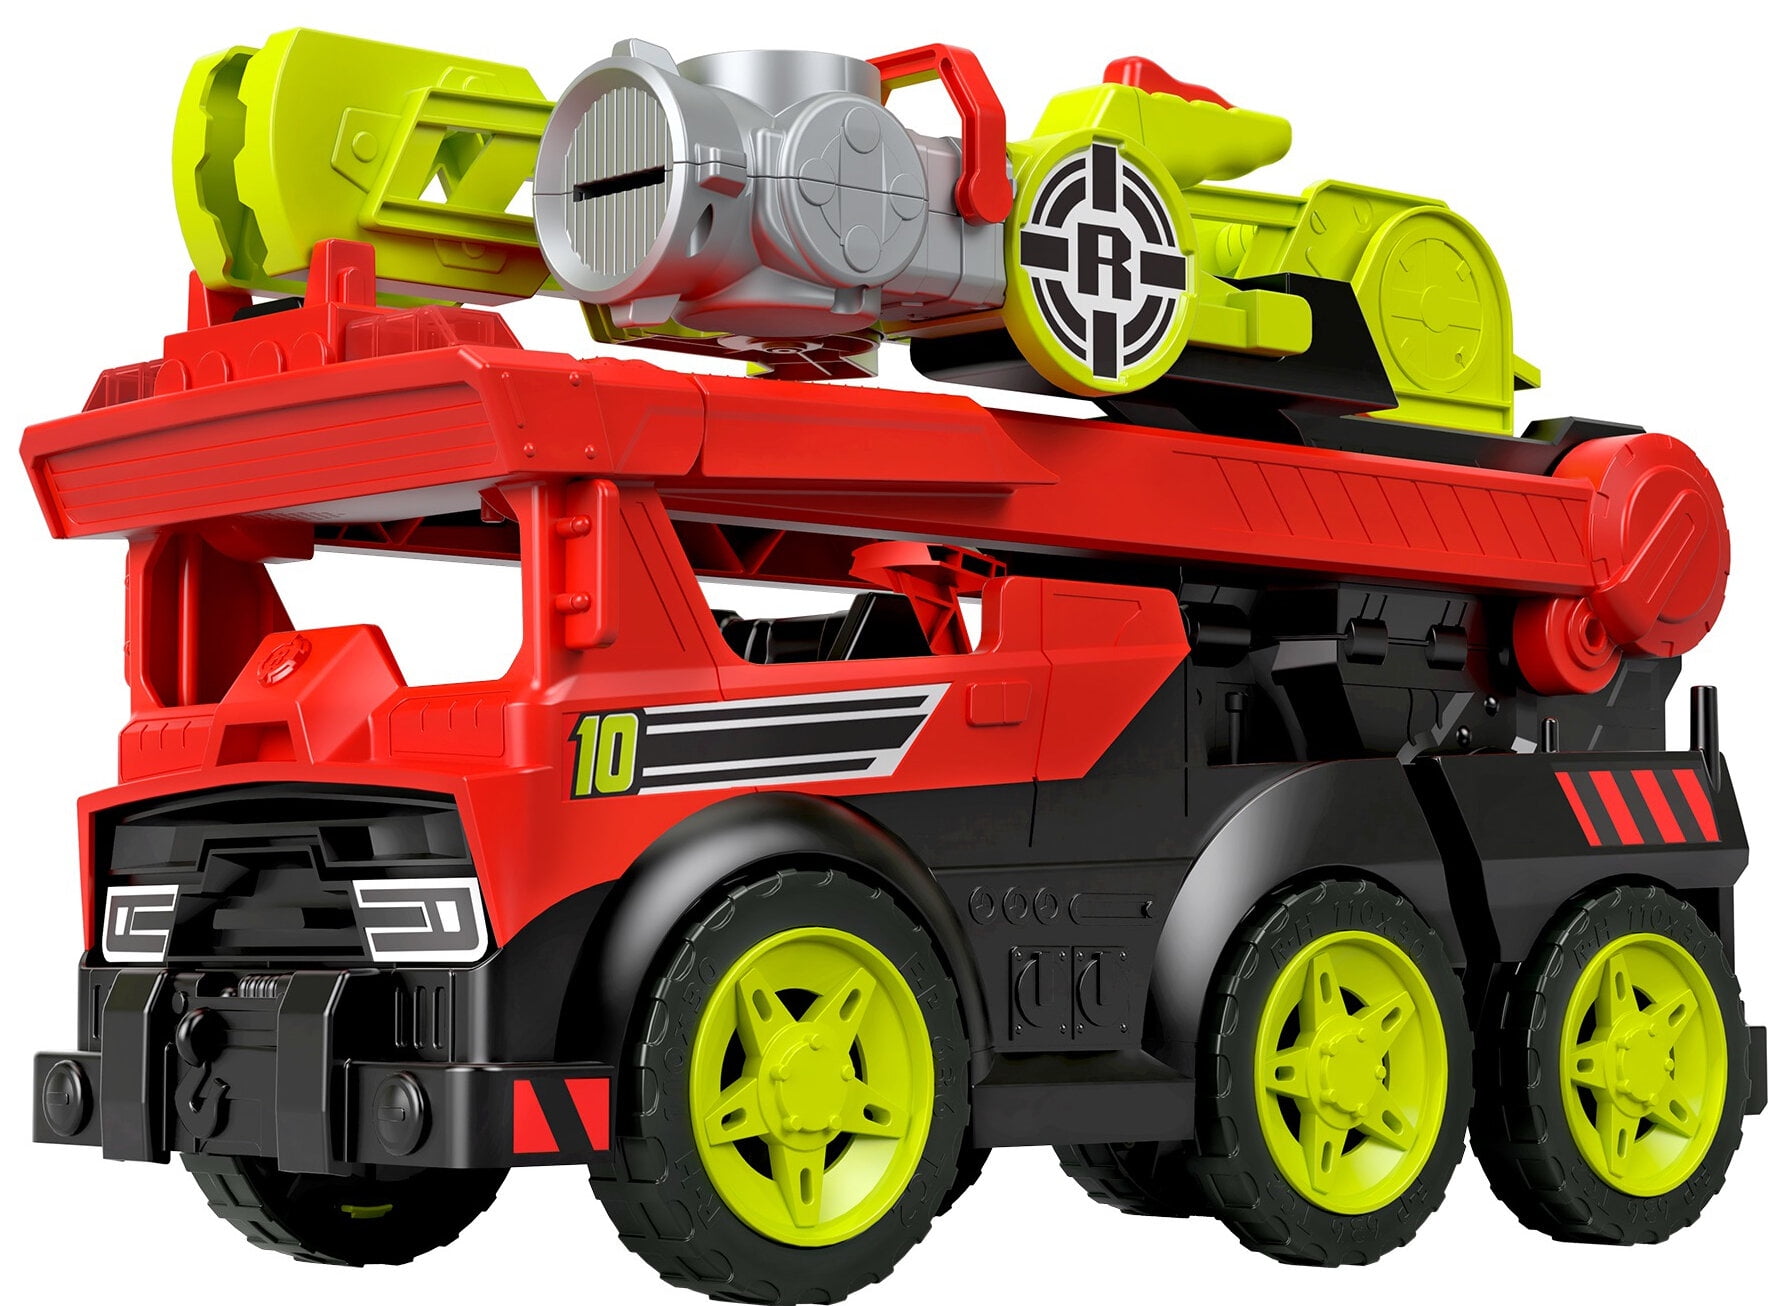 Imaginext GBK77 Transforming Batmobile Toy for sale online 